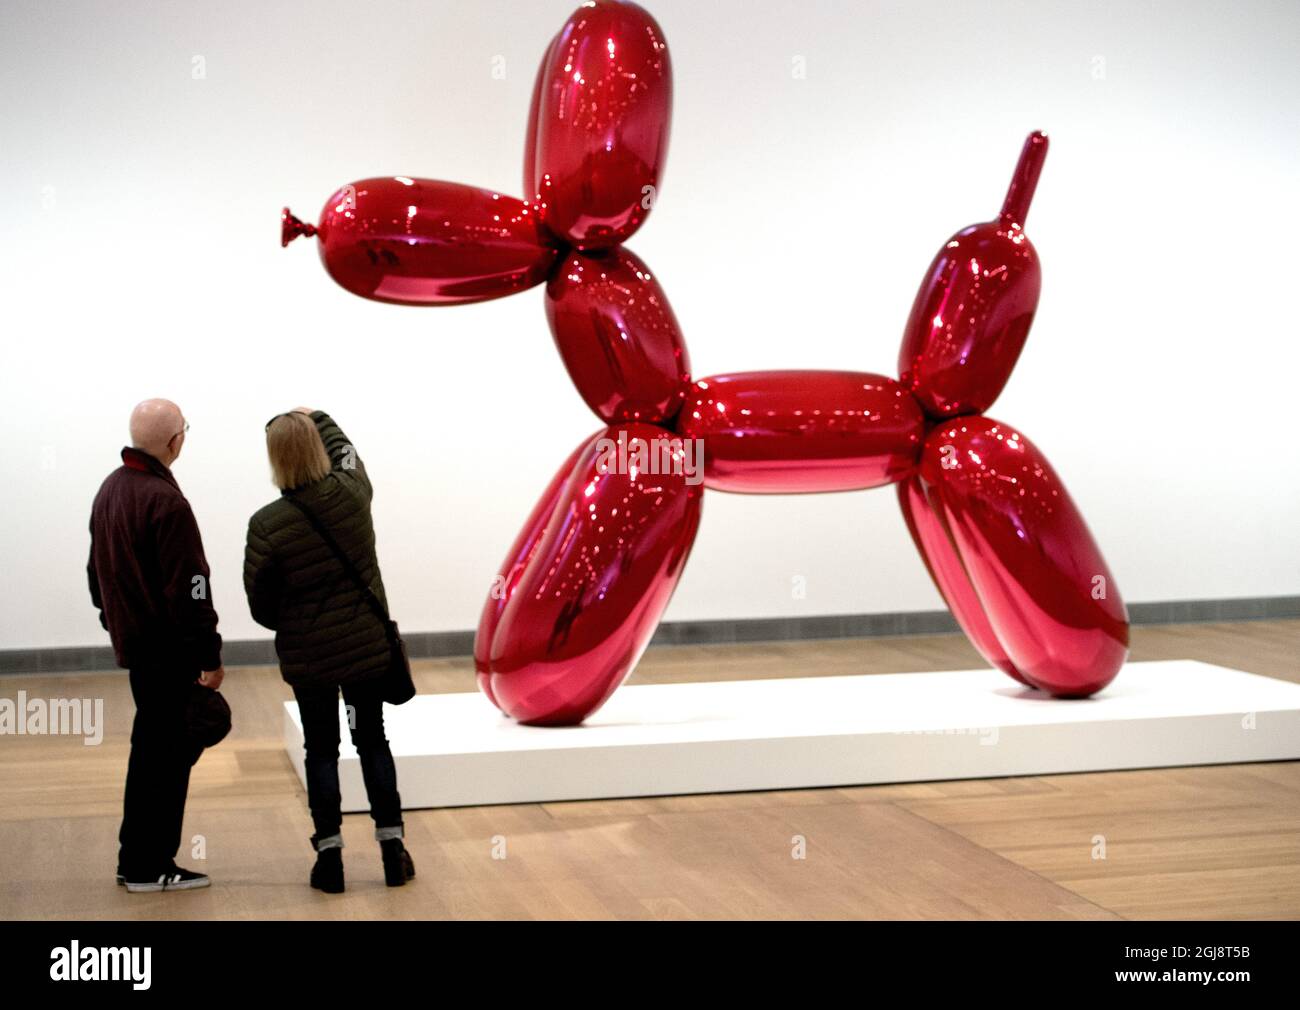 STOCKHOLM 20141011 The American artist Jeff Koons present some of his the  work at the joint exhibition Sculpture after sculpture at Moderna Museet in  Stockholm. Here his piece "Balloon dog" . Photo: